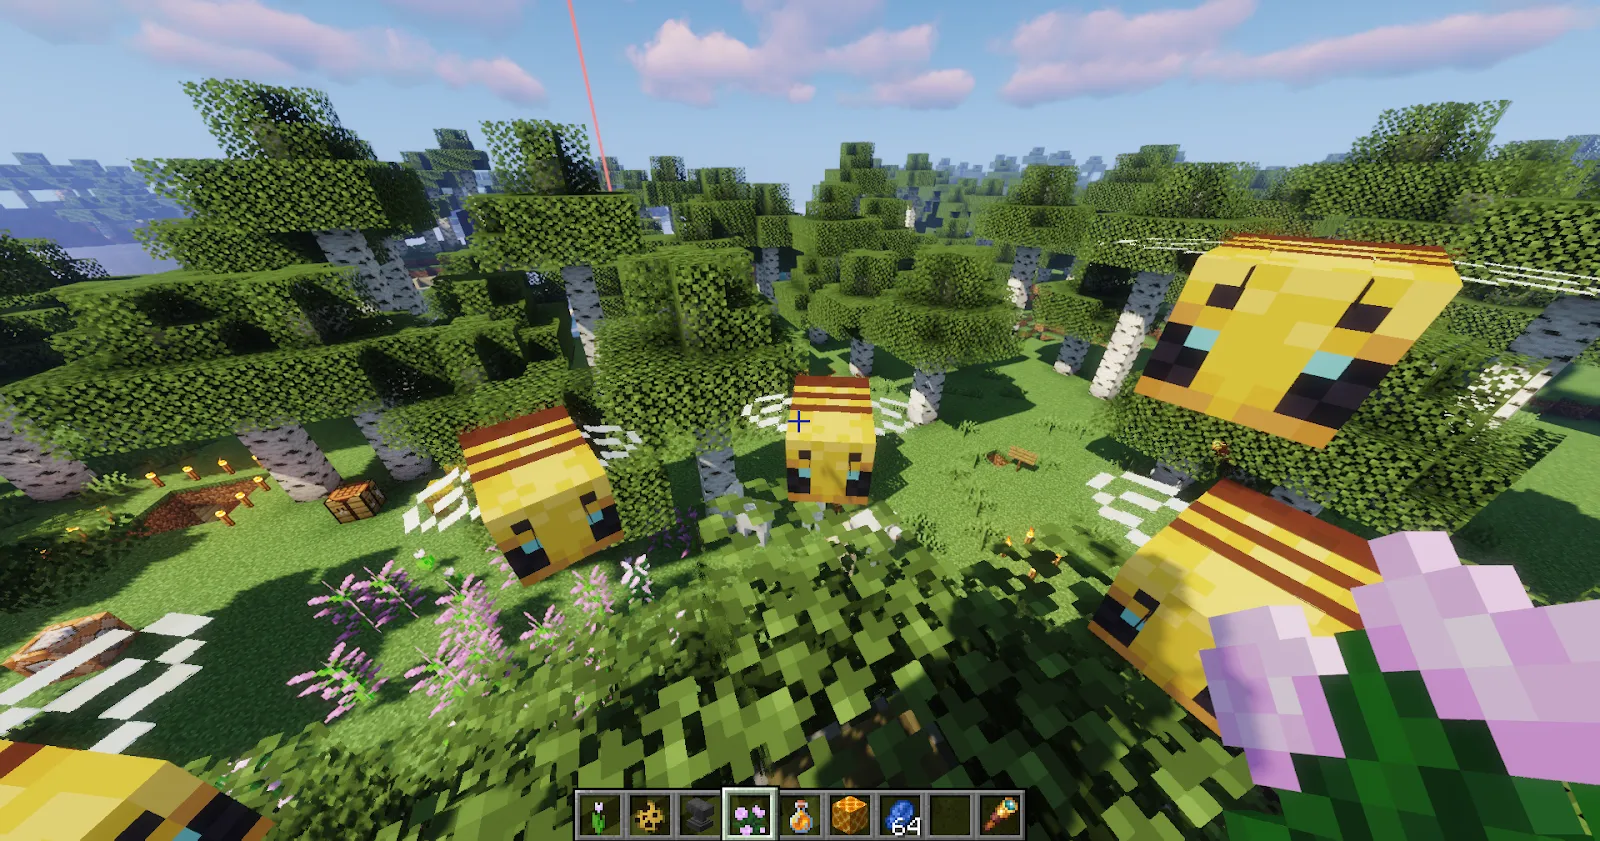 Peaceful Group of Bees in Minecraft